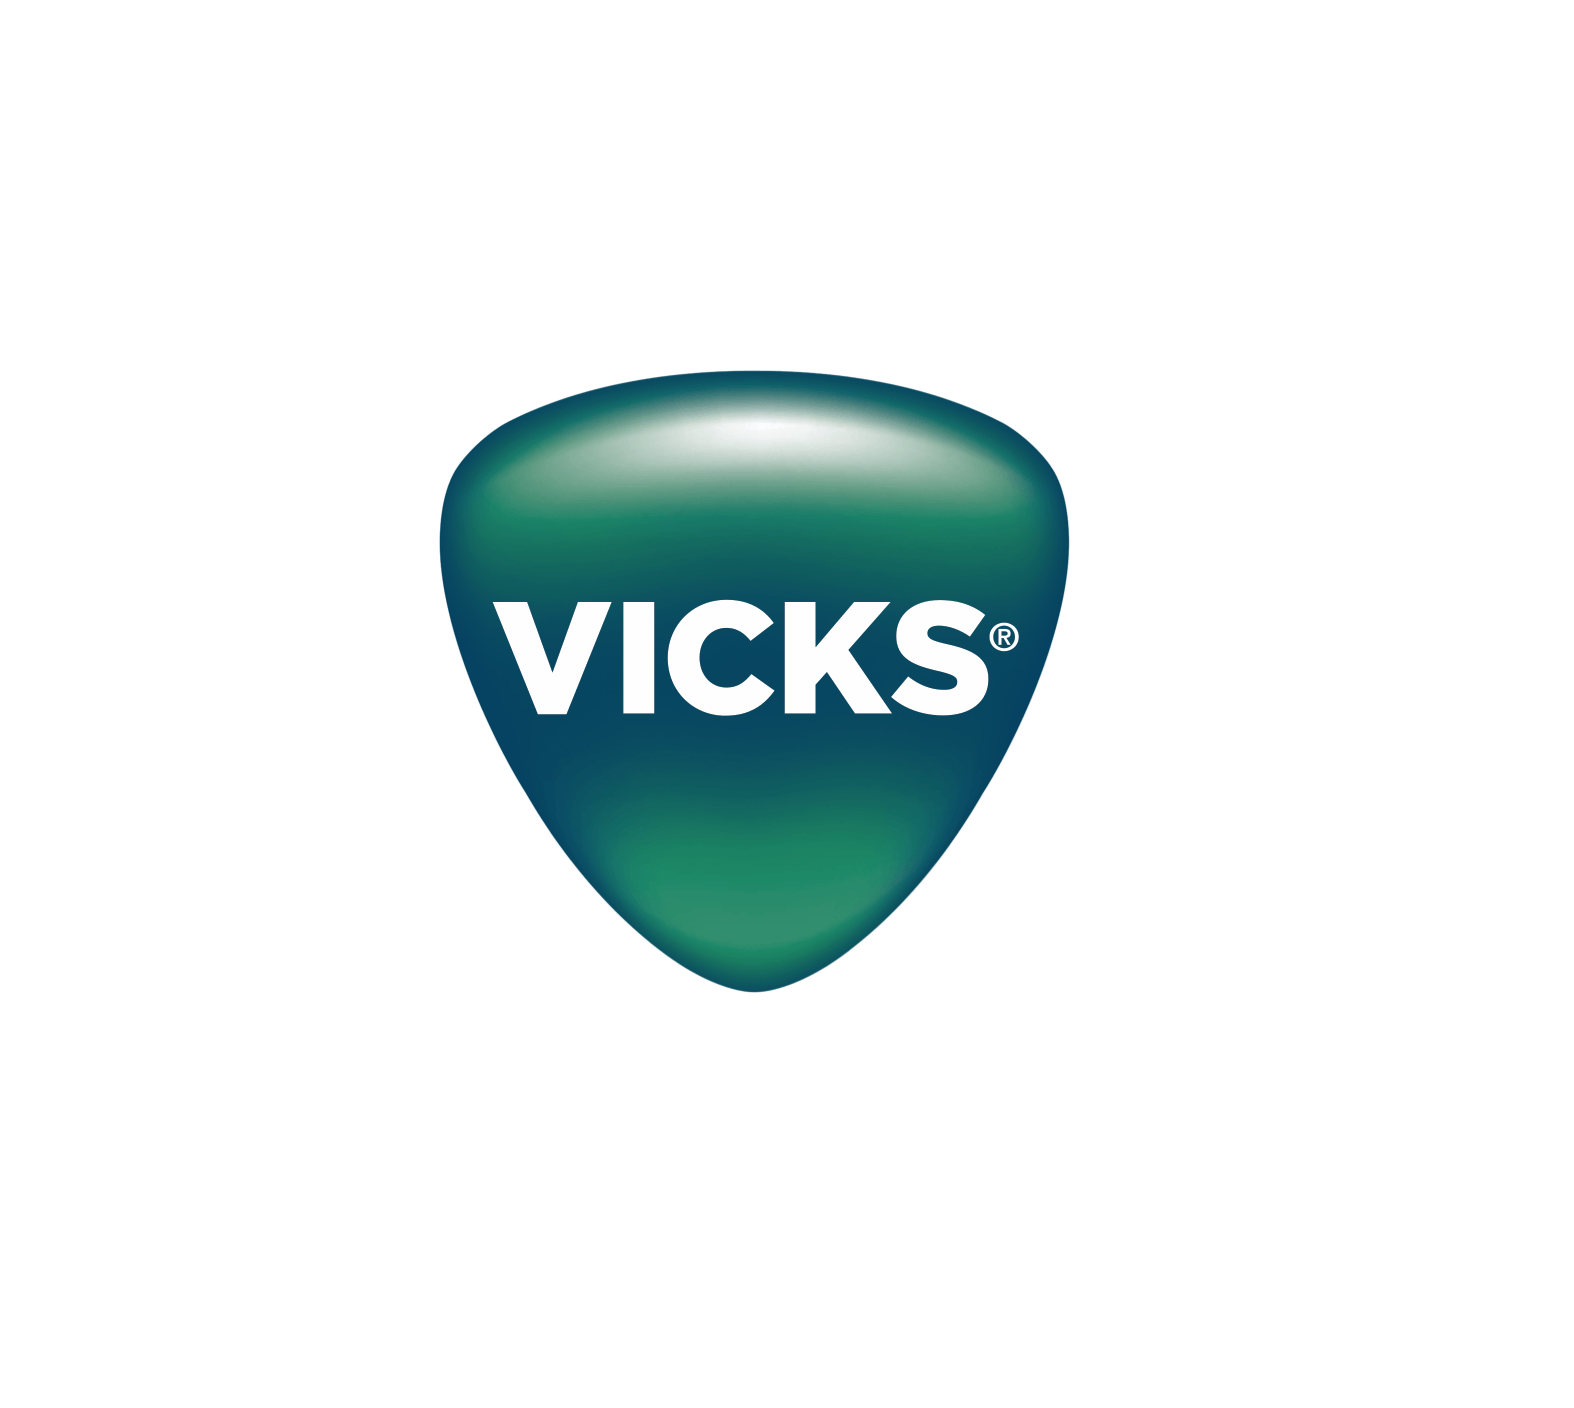 Vicks Logo - Did you get your High Value Coupons for @Vicks VapoRub products ...